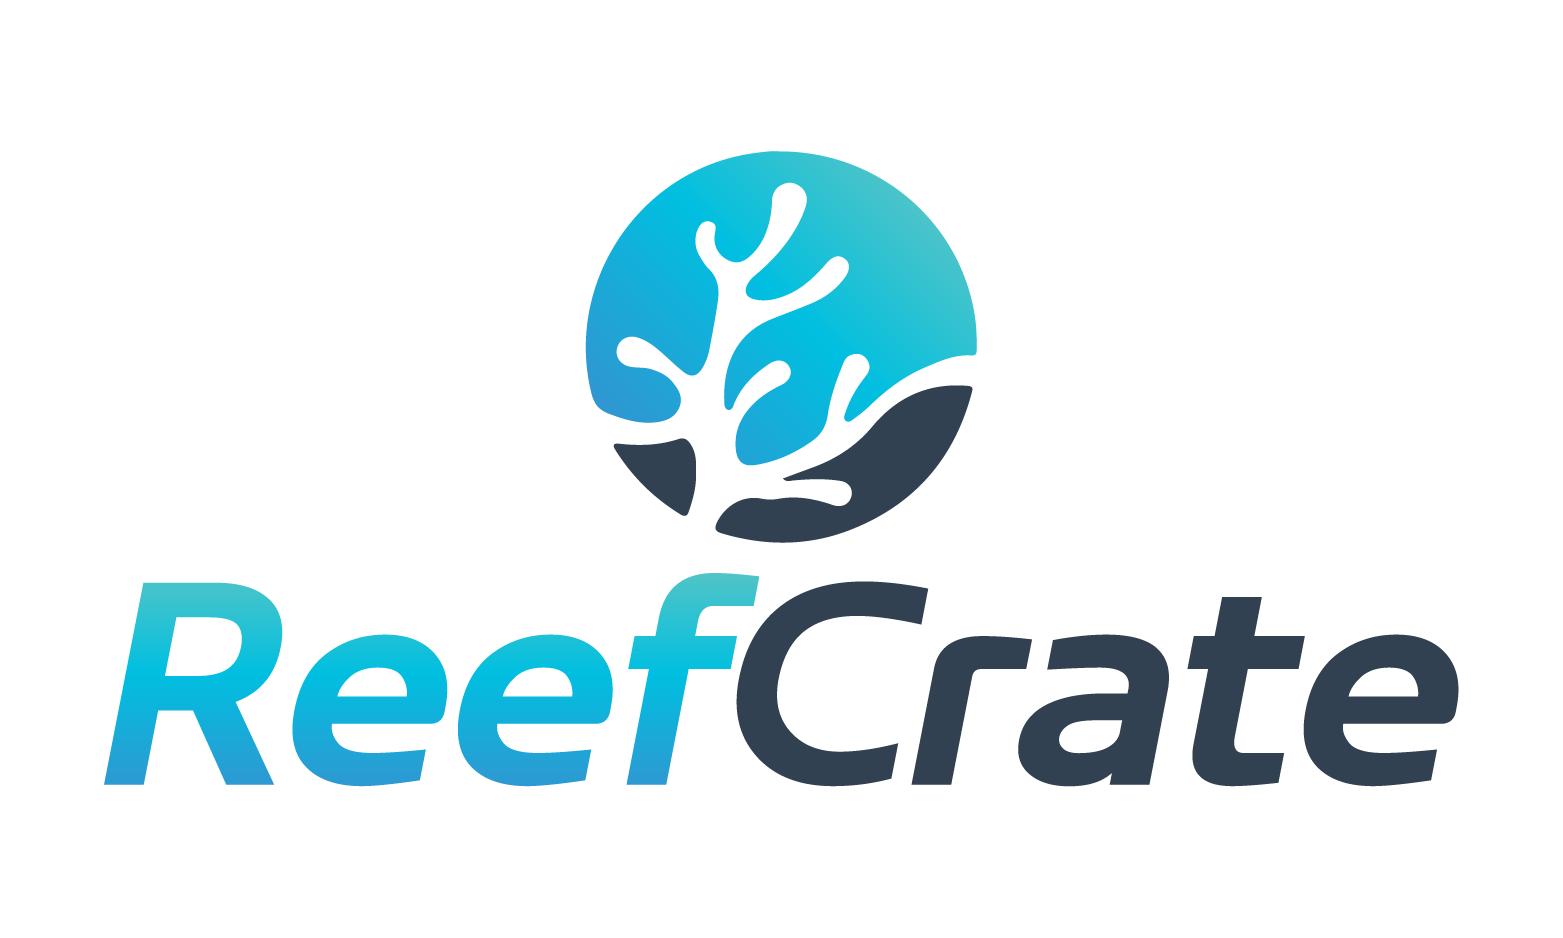 ReefCrate.com - Creative brandable domain for sale